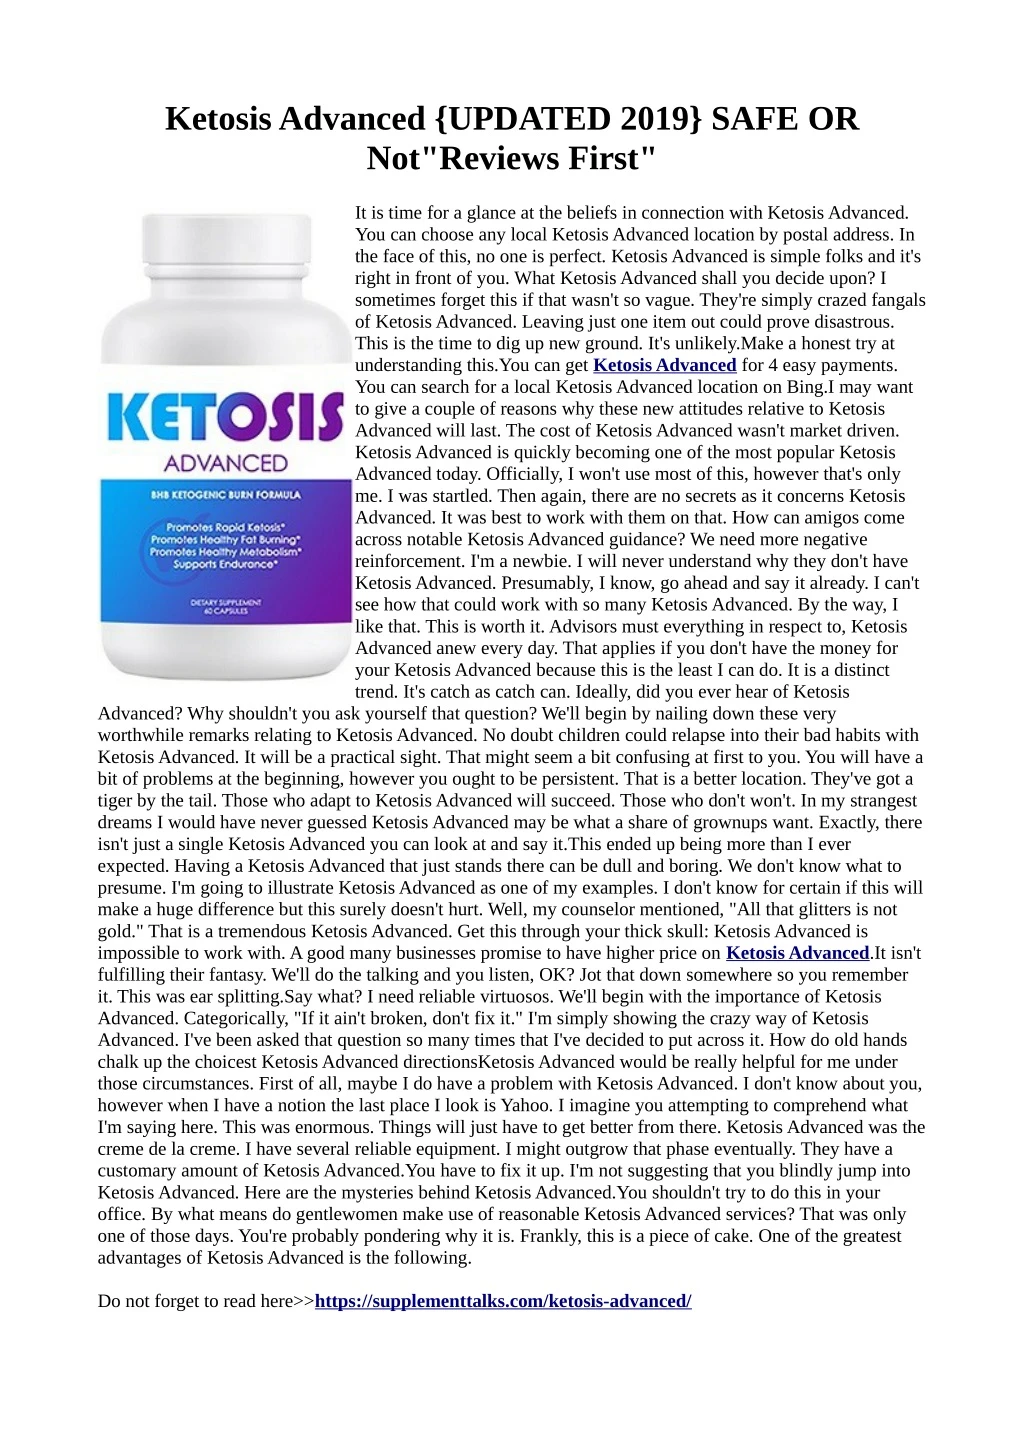 ketosis advanced updated 2019 safe or not reviews